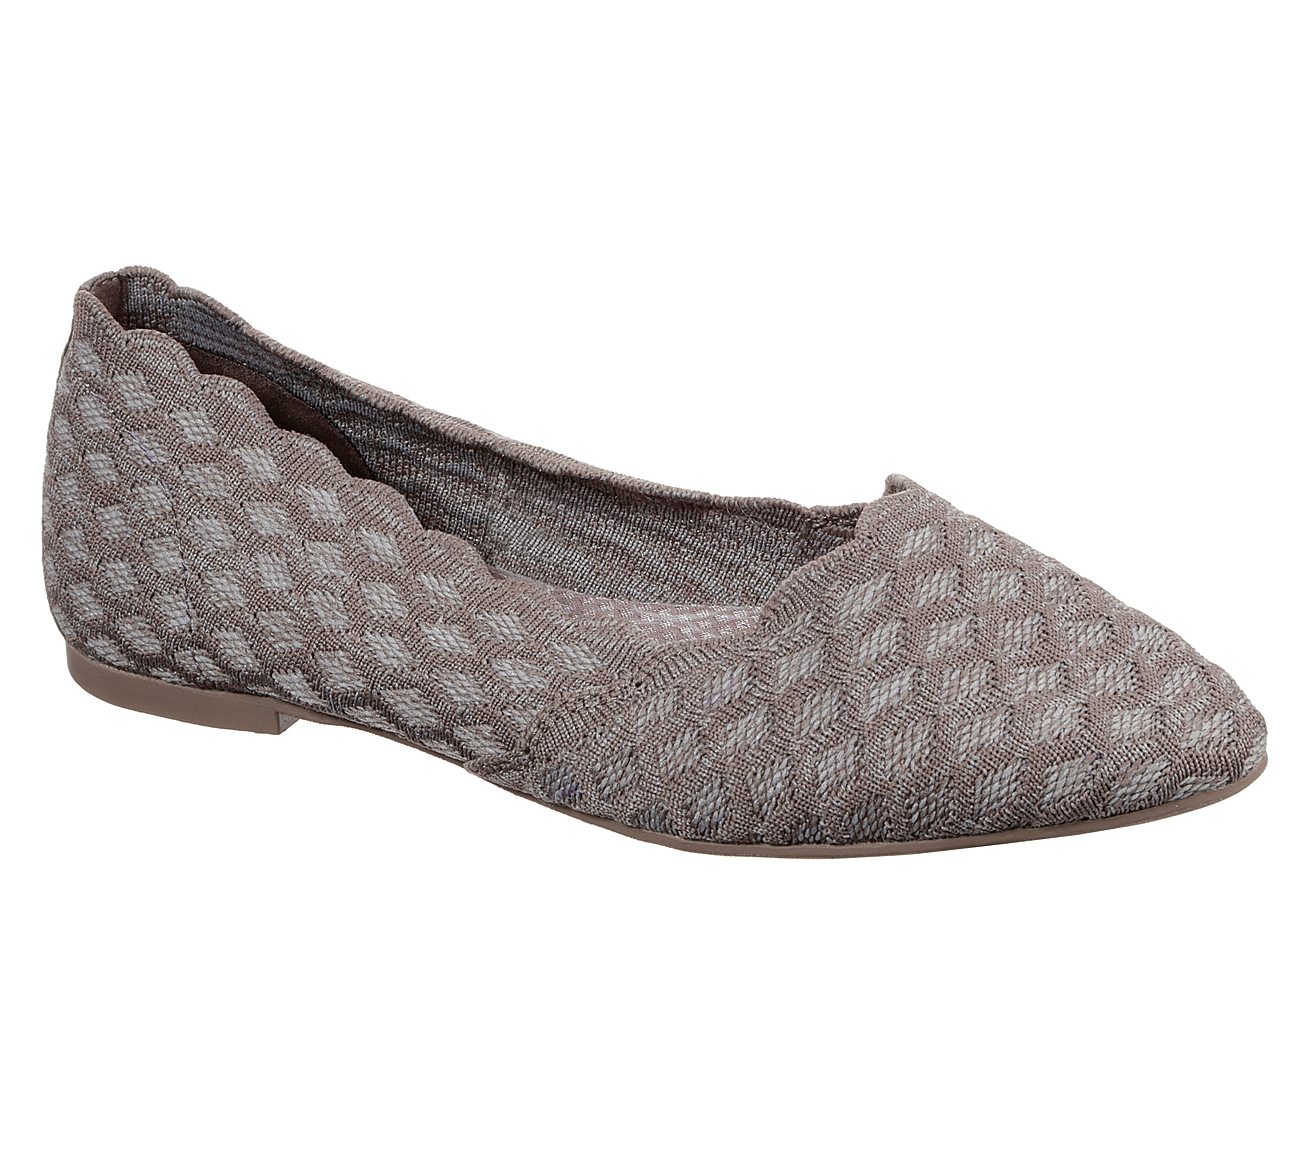 CLEO - HONEYCOMB, DARK TAUPE Footwear Right View